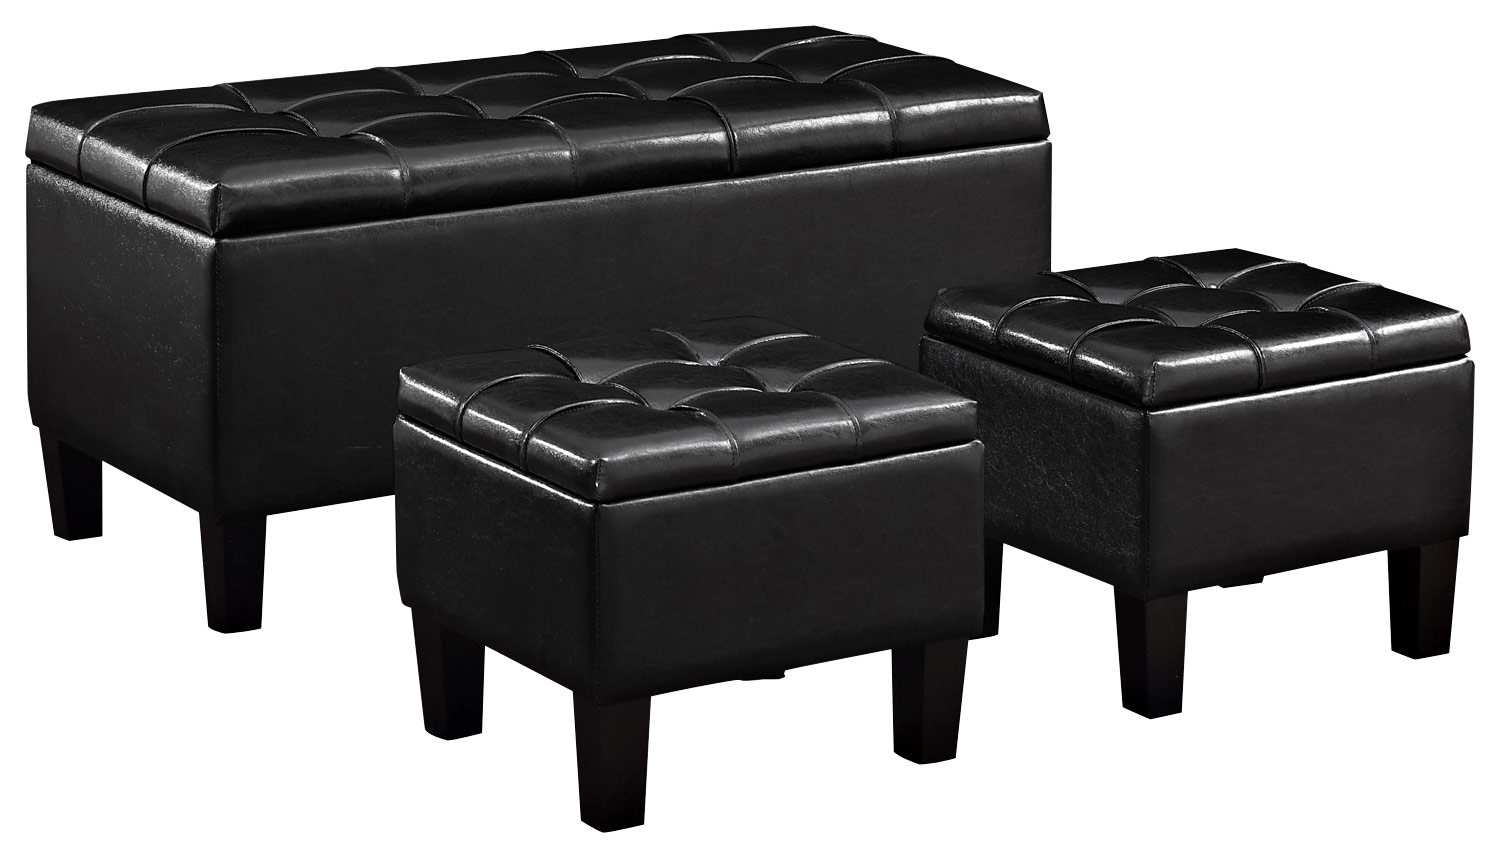 Simpli Home - Dover Rectangular Faux Leather Storage Ottoman Bench (Set of 3) - Midnight Black was $291.99 now $217.99 (25.0% off)